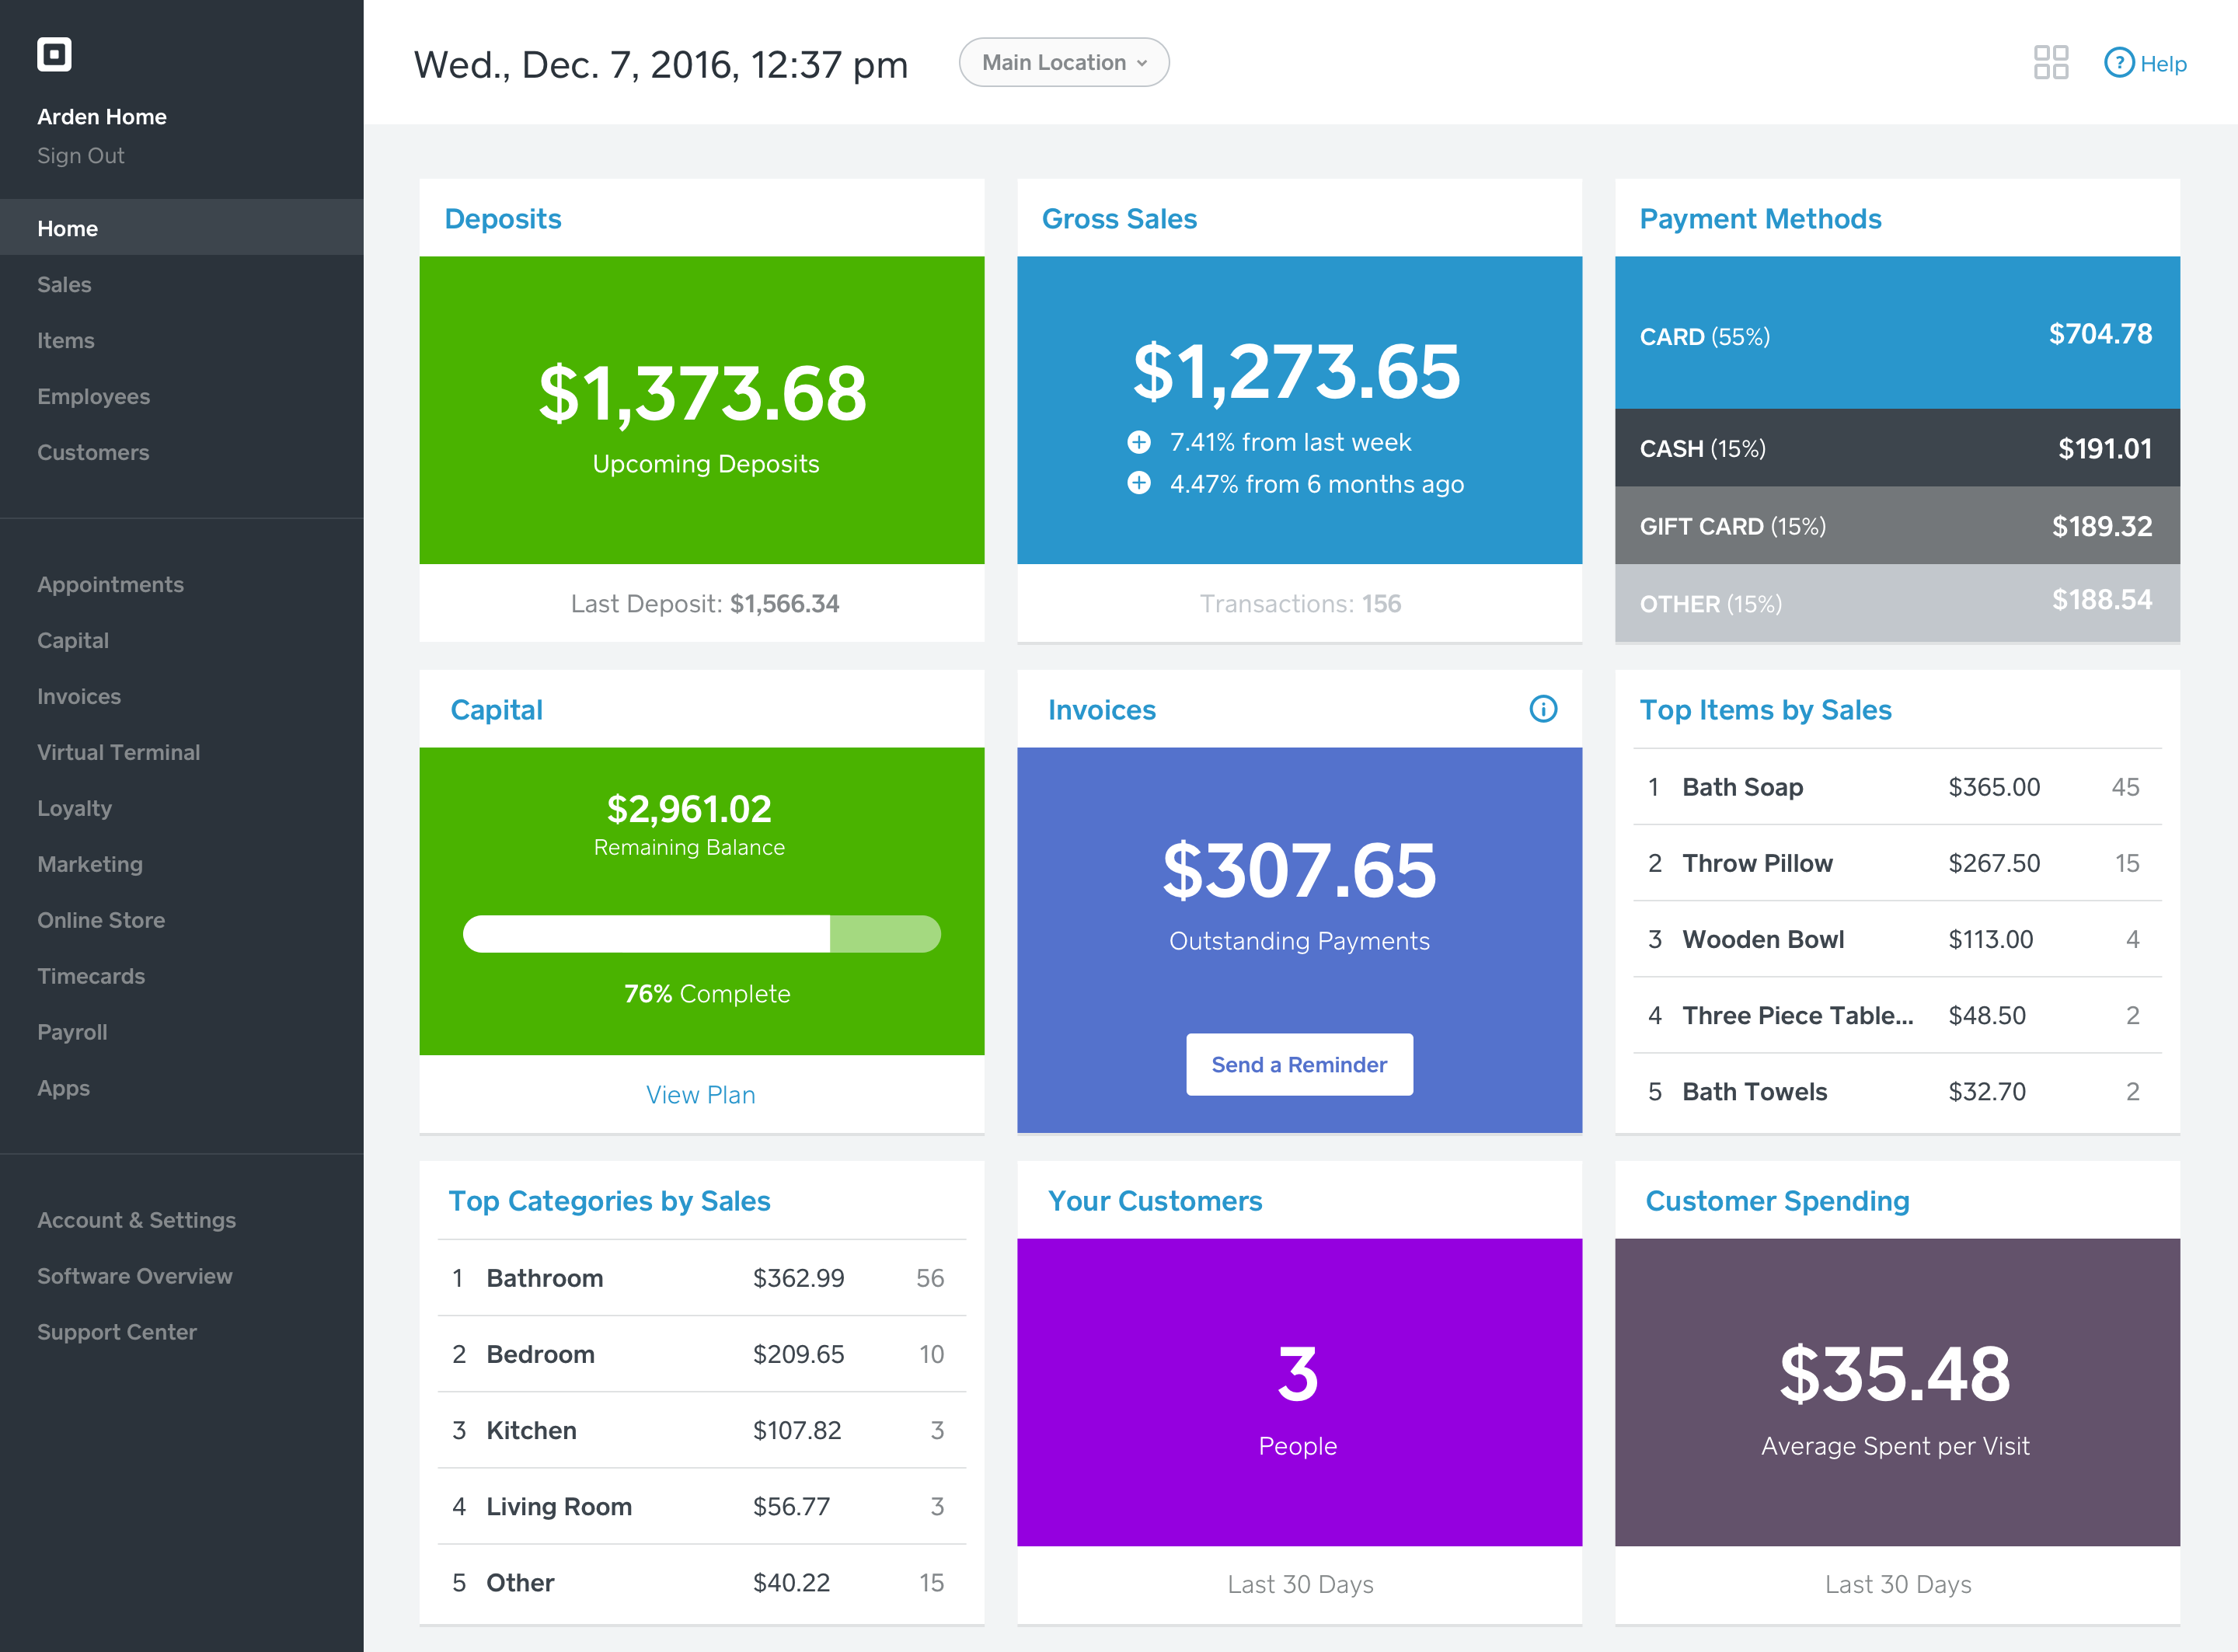 Image: A screenshot of the Square Seller Dashboard